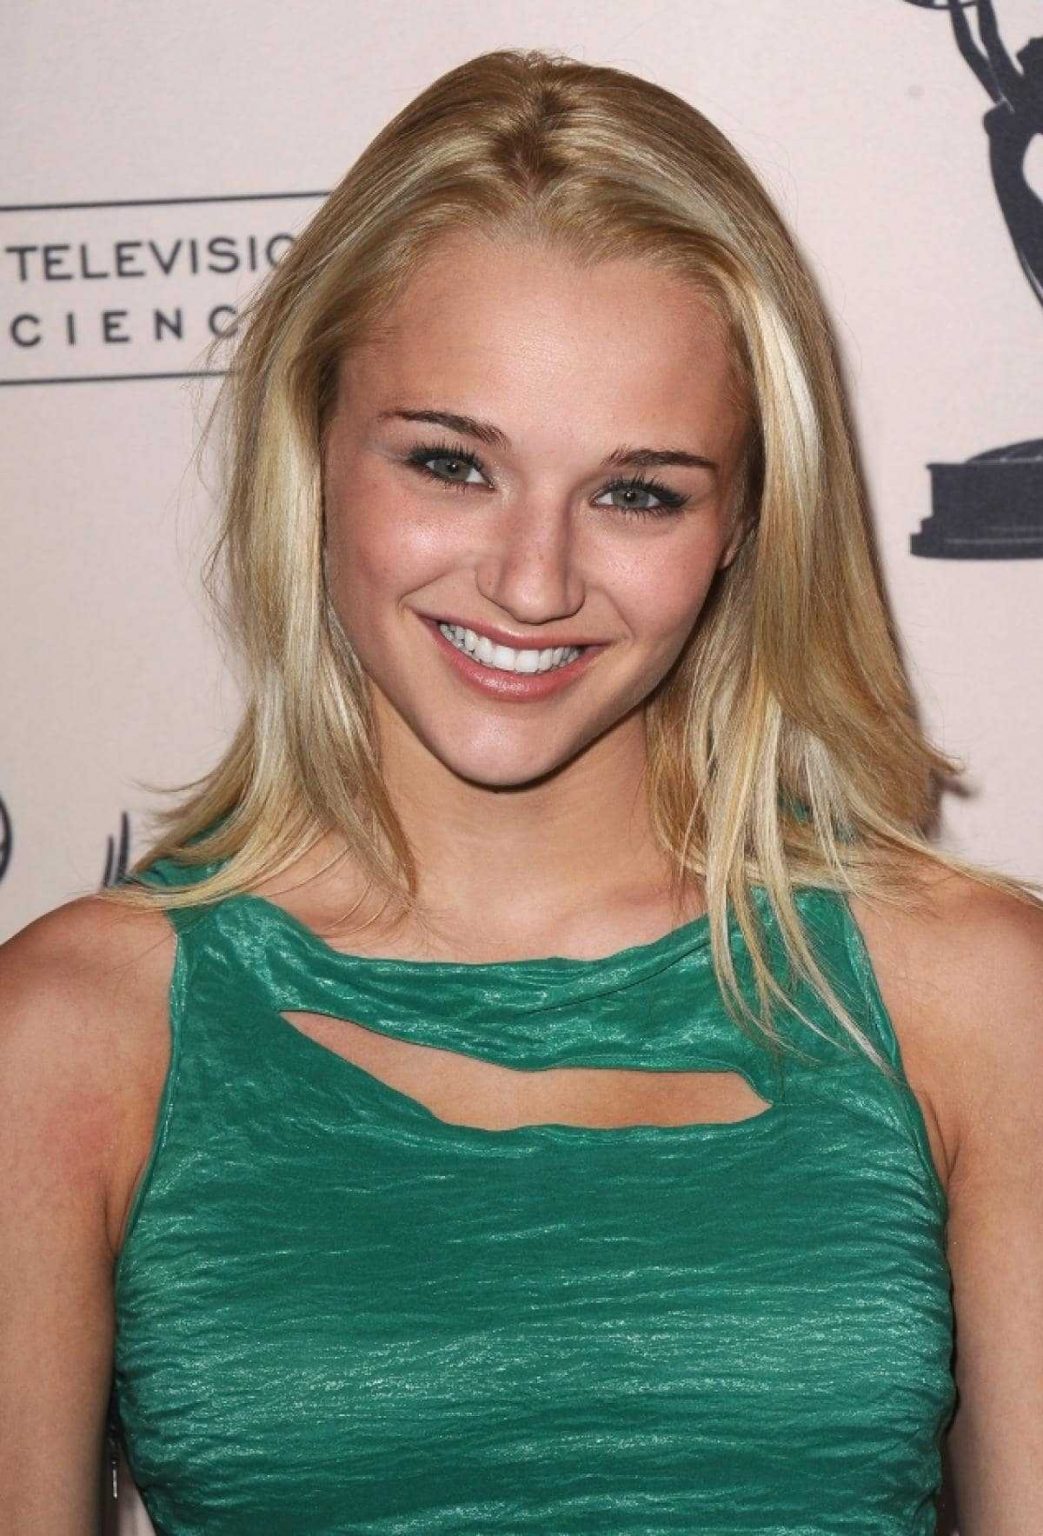 51 Hunter King Nude Pictures Display Her As A Skilled Performer 24